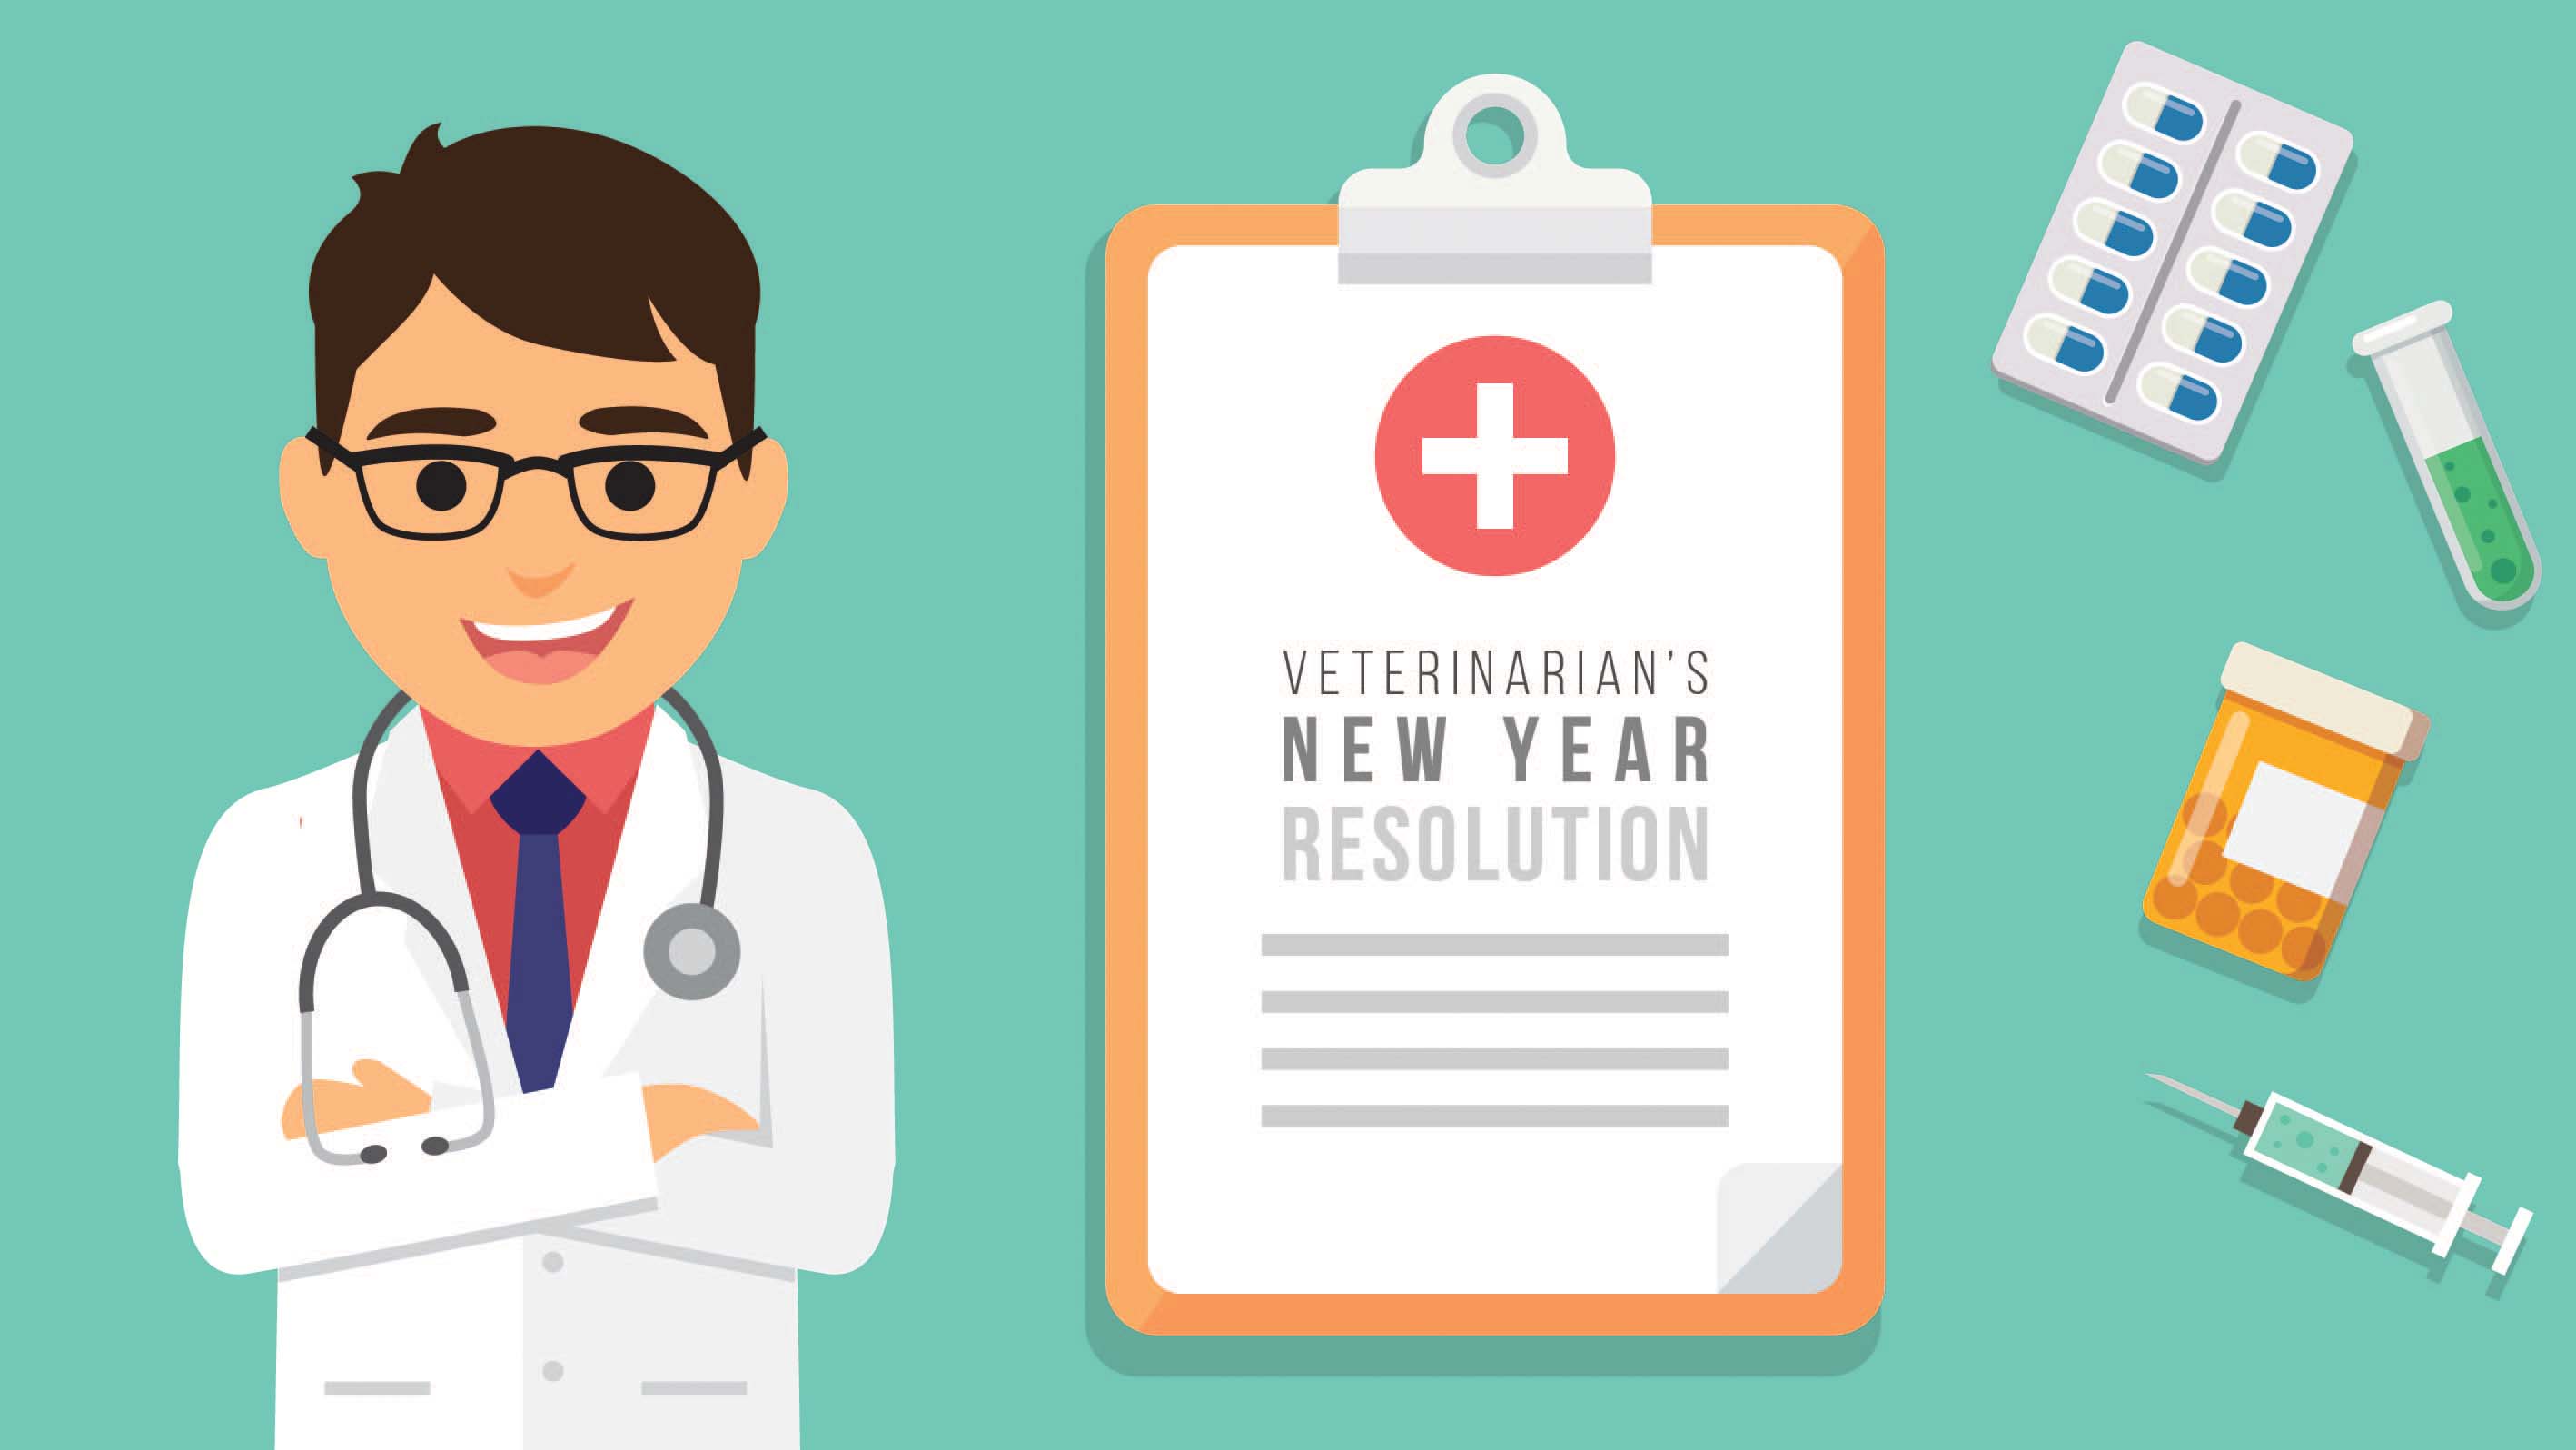 Veterinarians’ New Year resolutions - Baby Steps towards better Veterinary Practice Management